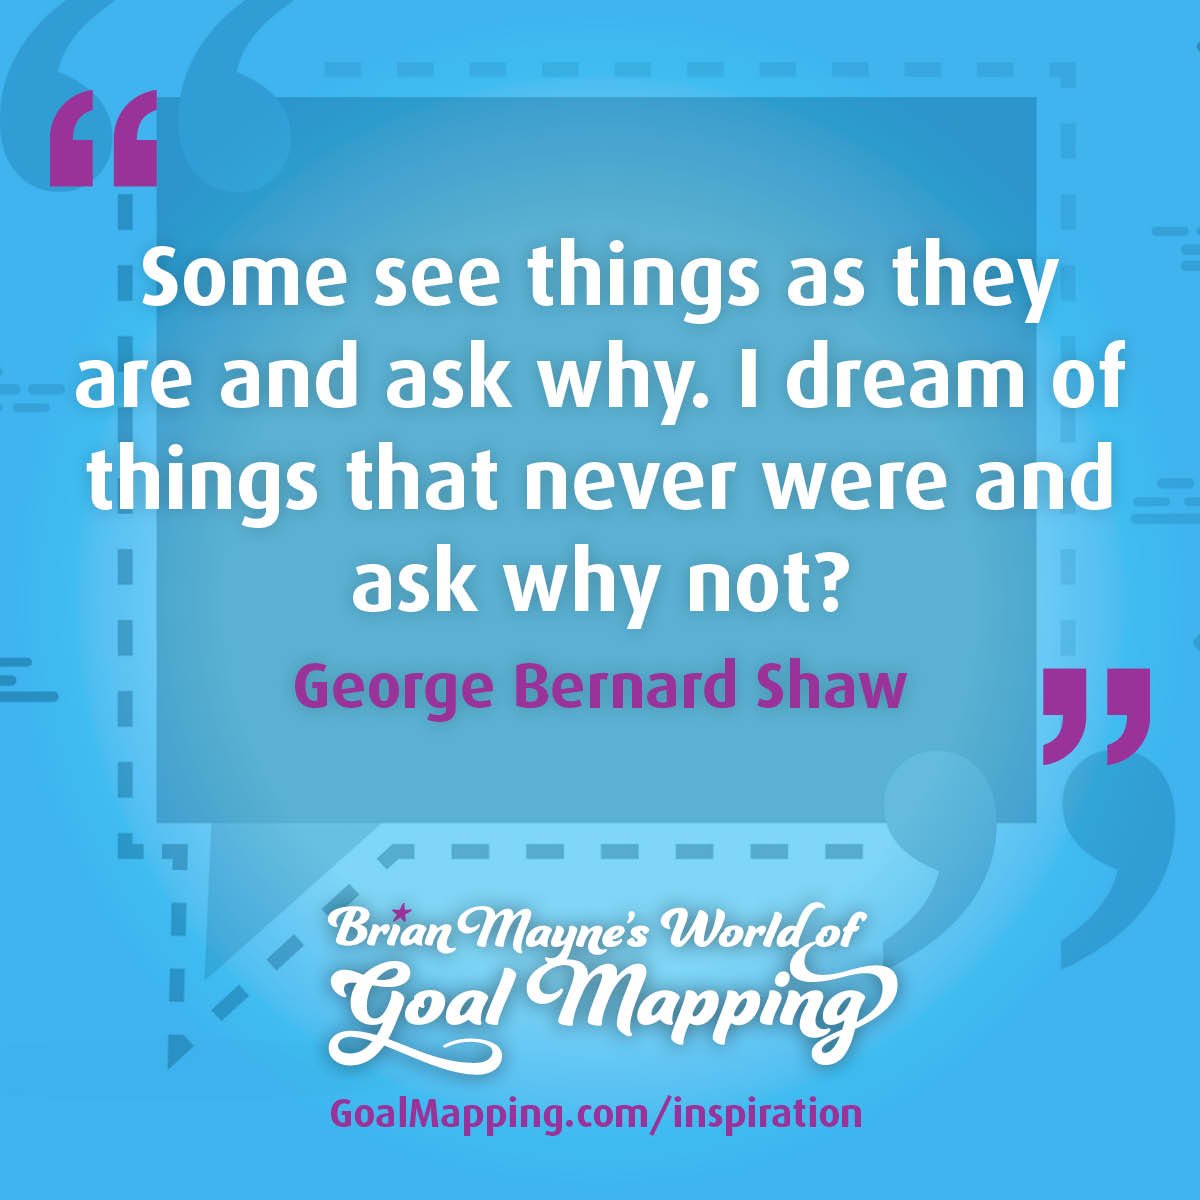 "Some see things as they are and ask why. I dream of things that never were and ask why not?" George Bernard Shaw